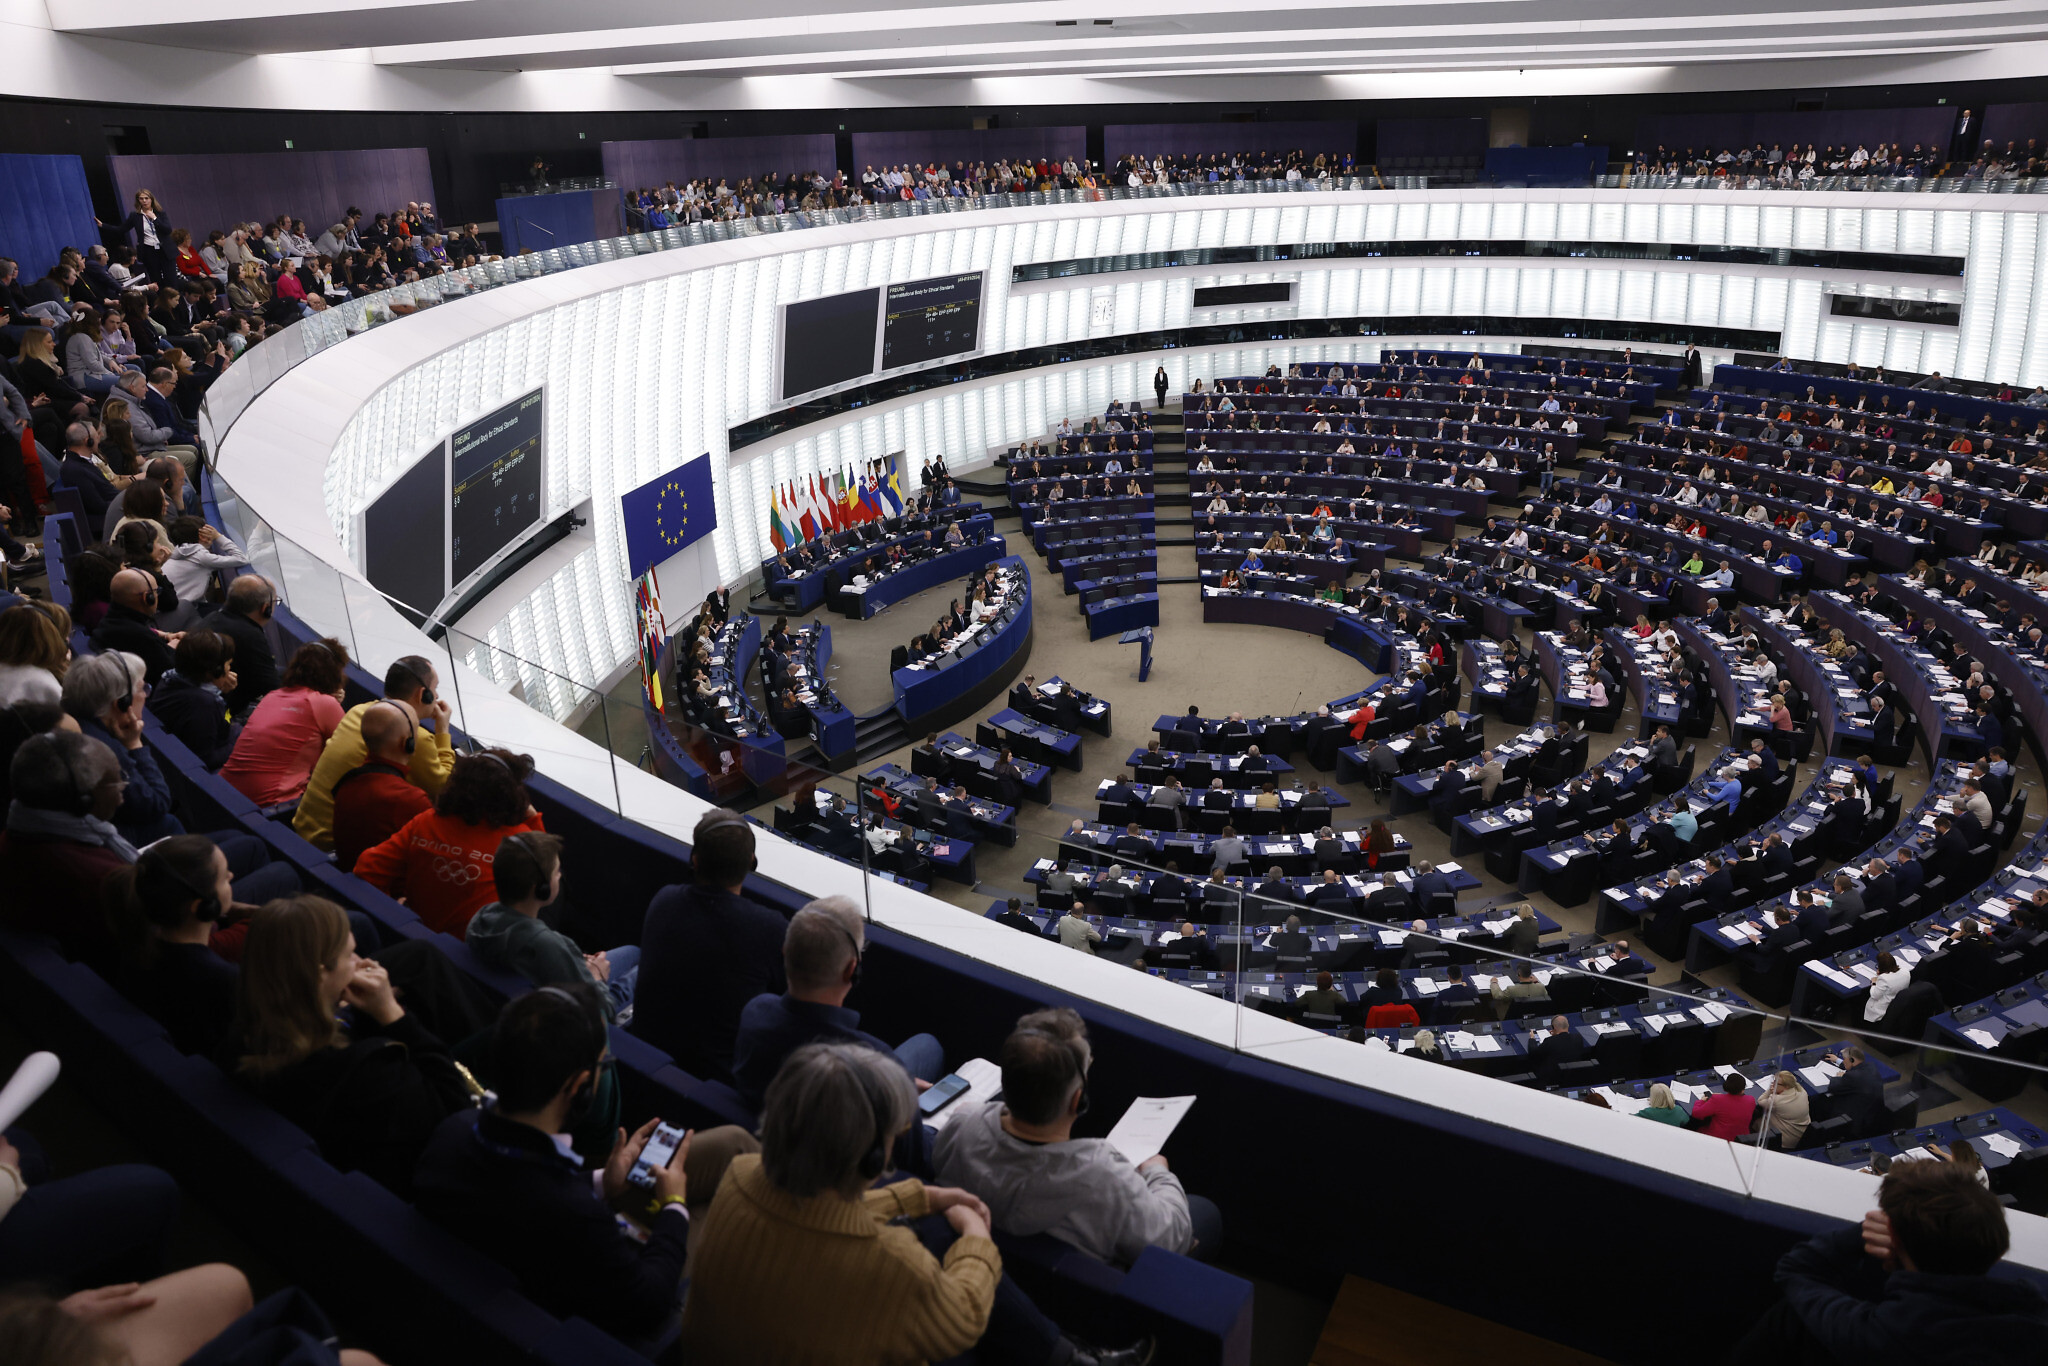 European Parliament adopts resolution condemning Iran, calling for  sanctions in vote of 357-20 | The Times of Israel